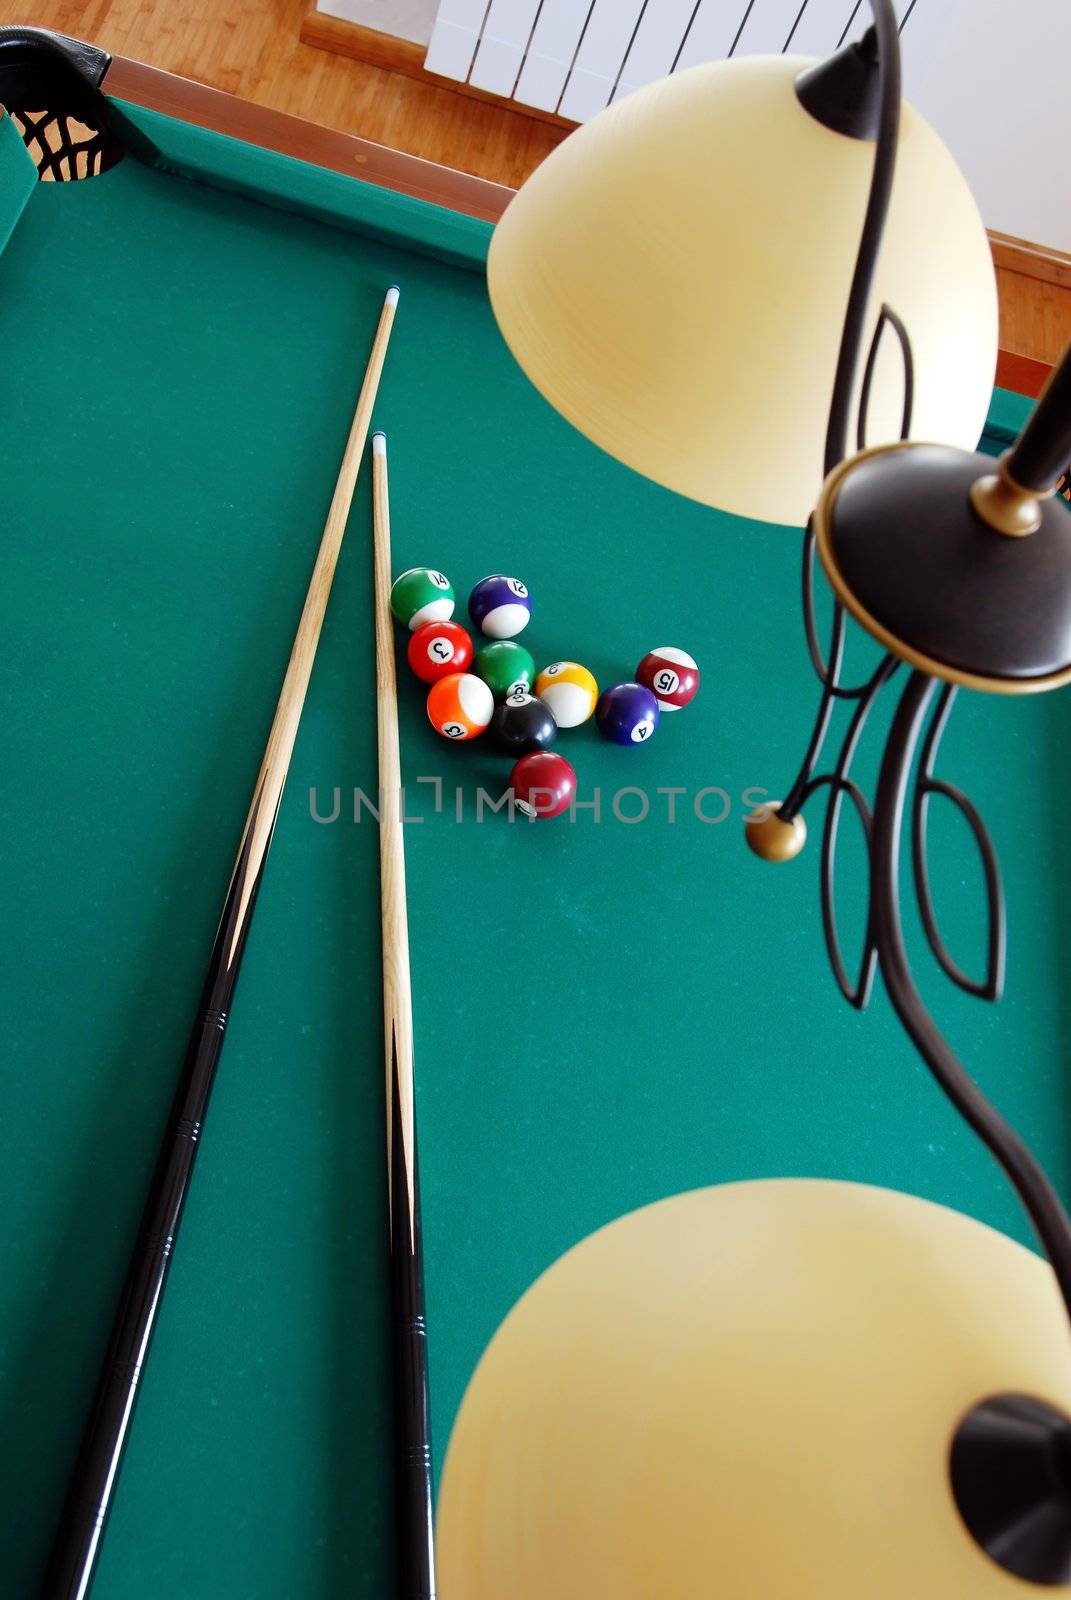 Billiards by simply